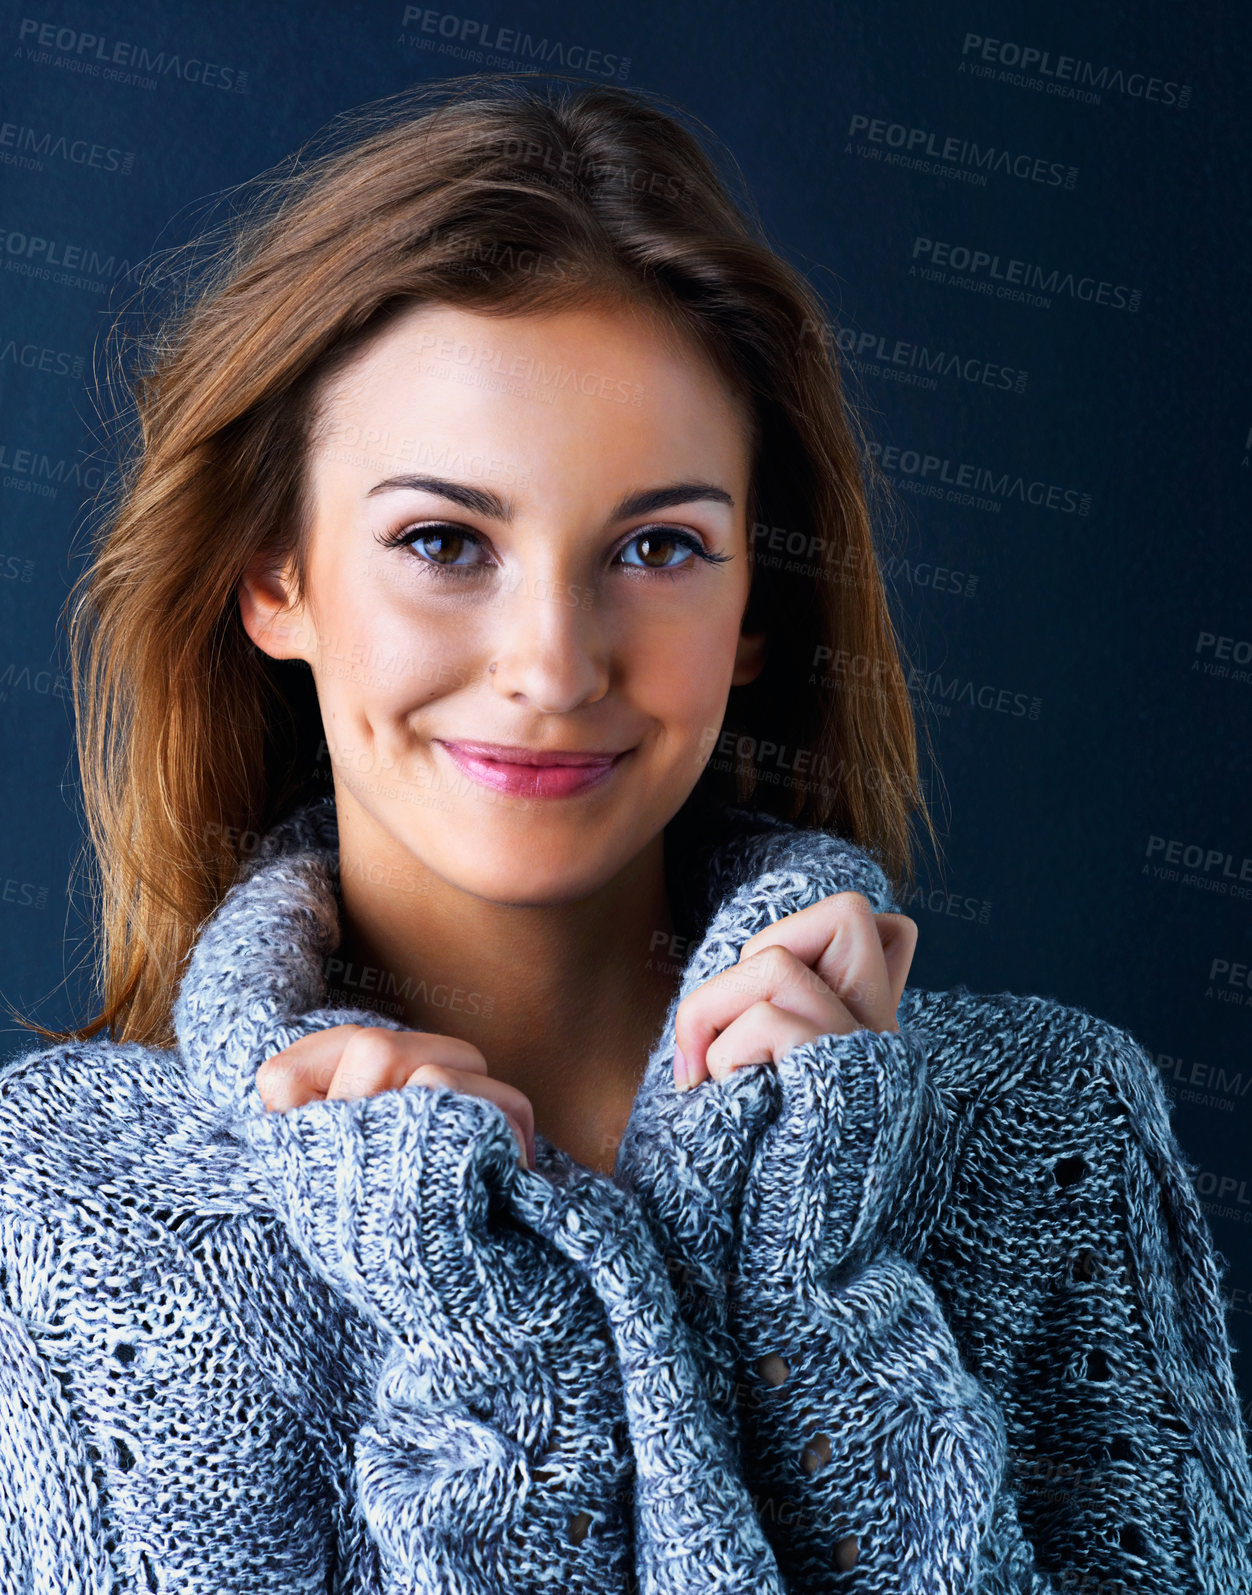 Buy stock photo Studio portrait of a cute teenage girl in a sweater posing against a dark background